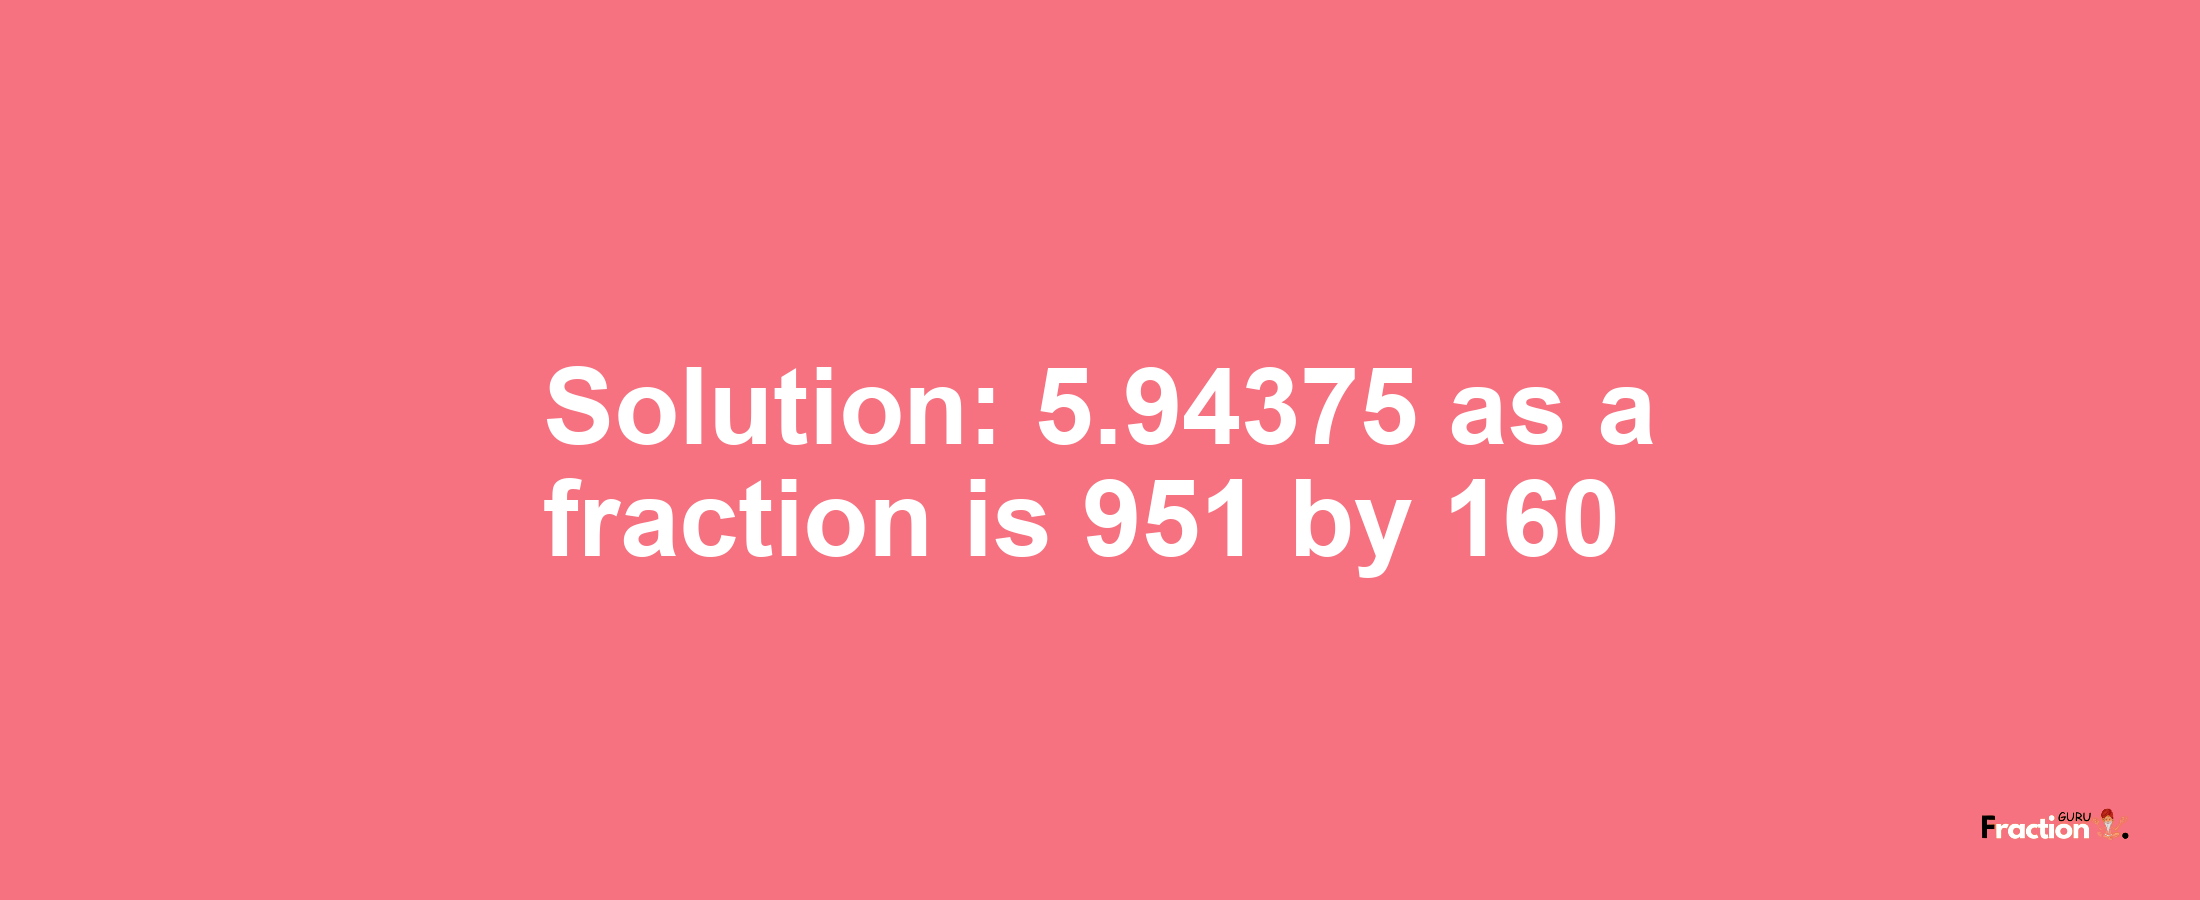 Solution:5.94375 as a fraction is 951/160